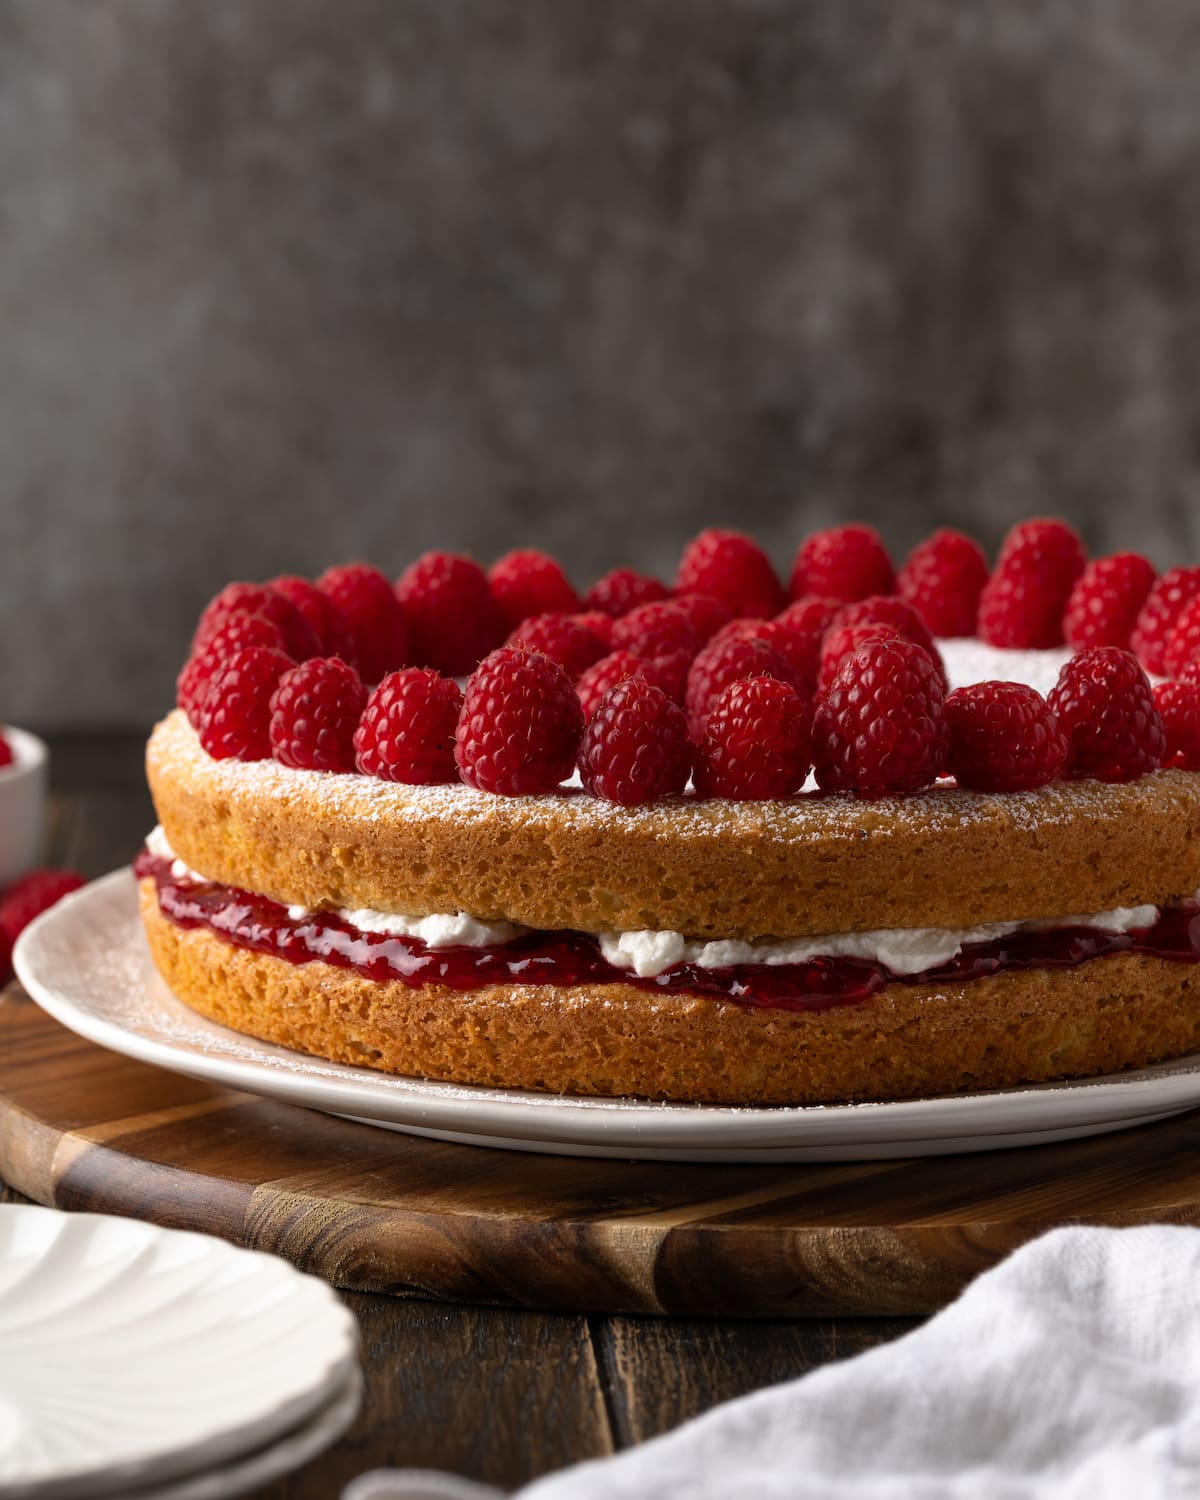 Side view of a Victoria sponge cake topped with fresh raspberries on a white plate.